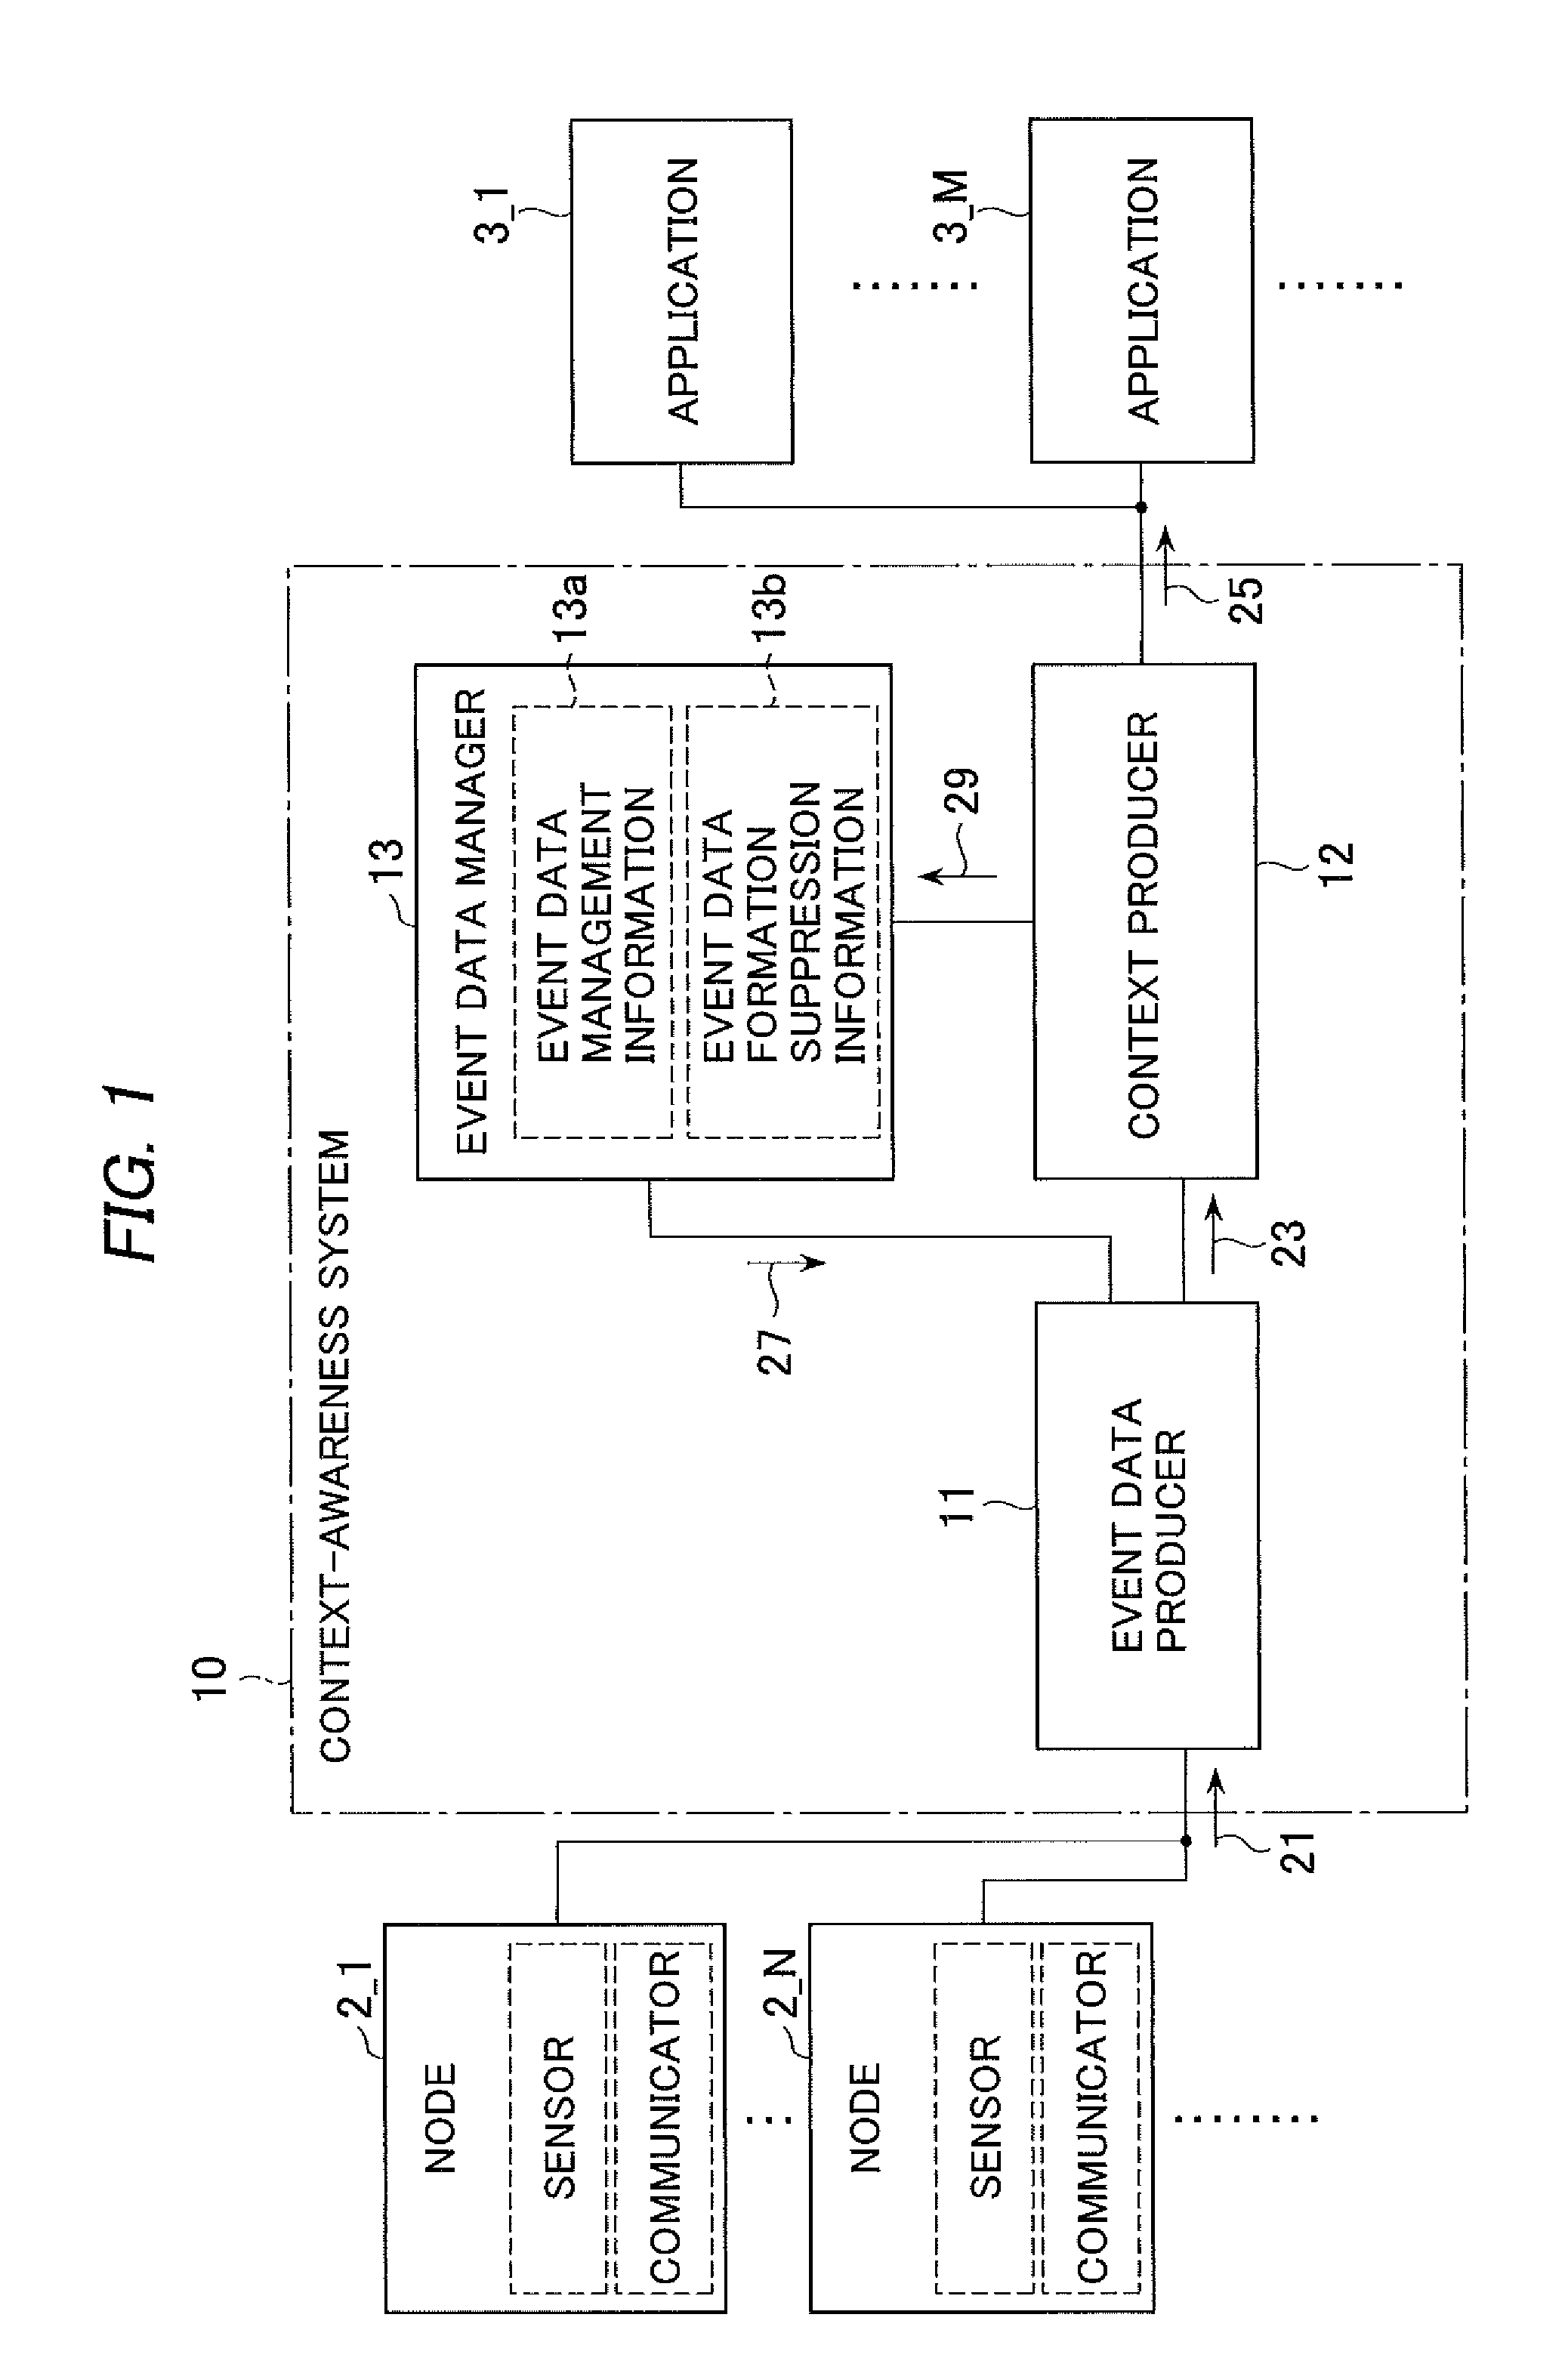 Context-awareness system and method of forming event data